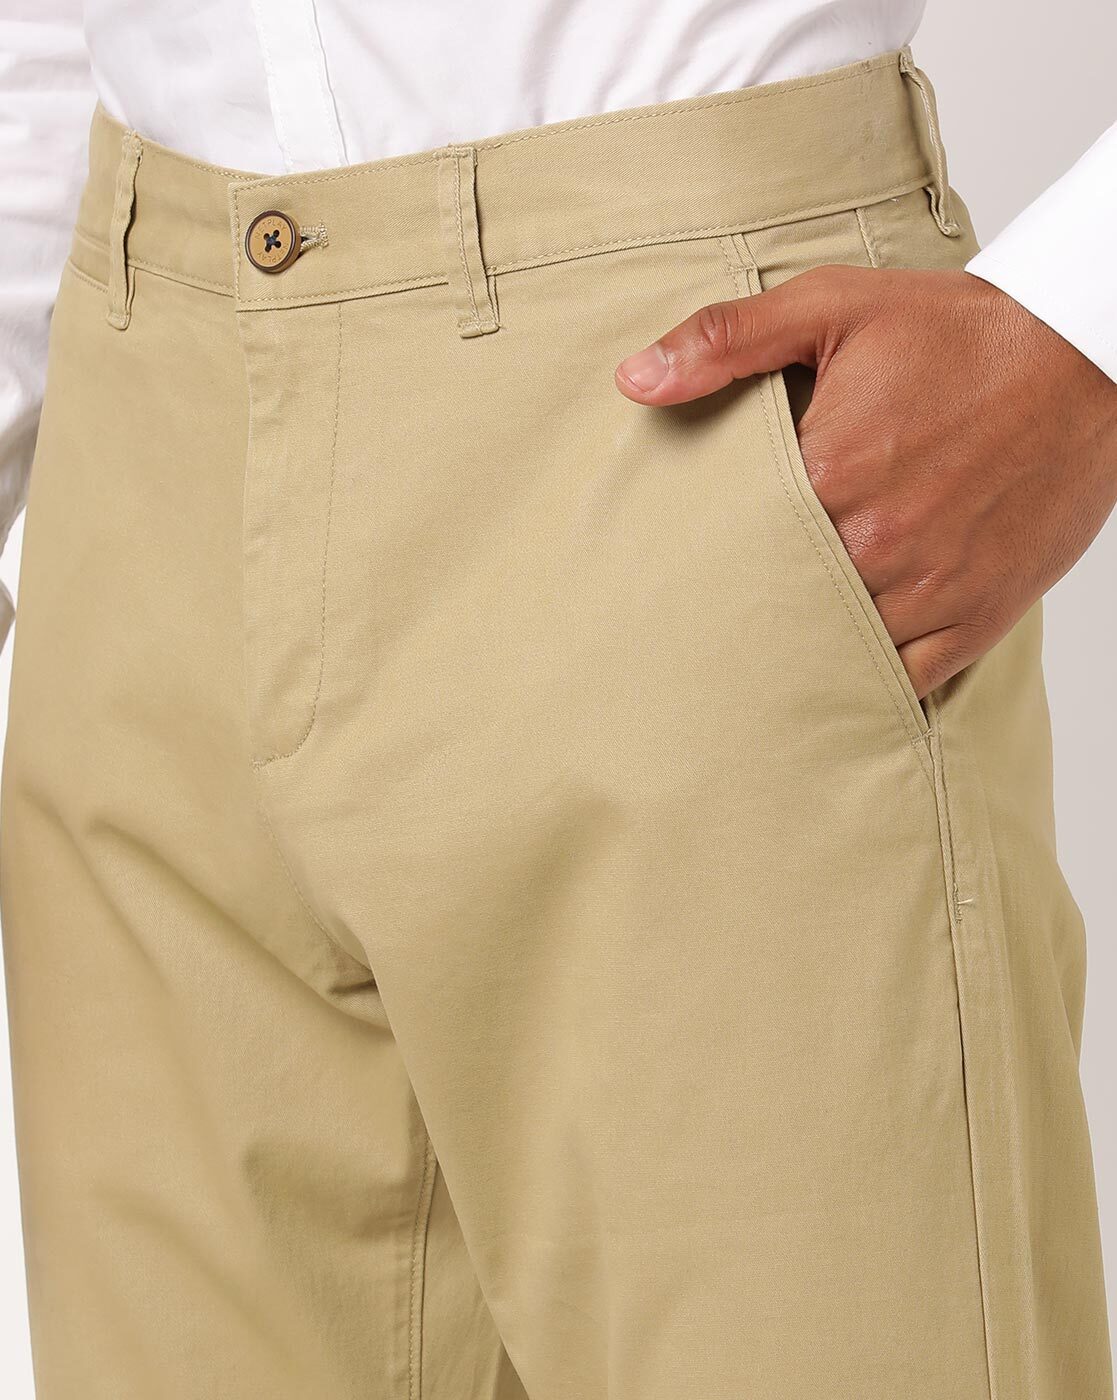 Dockers Easy Khaki D3 Classic-Fit Flat-Front Pant, Coffee Bean, 30 30 :  Amazon.in: Fashion